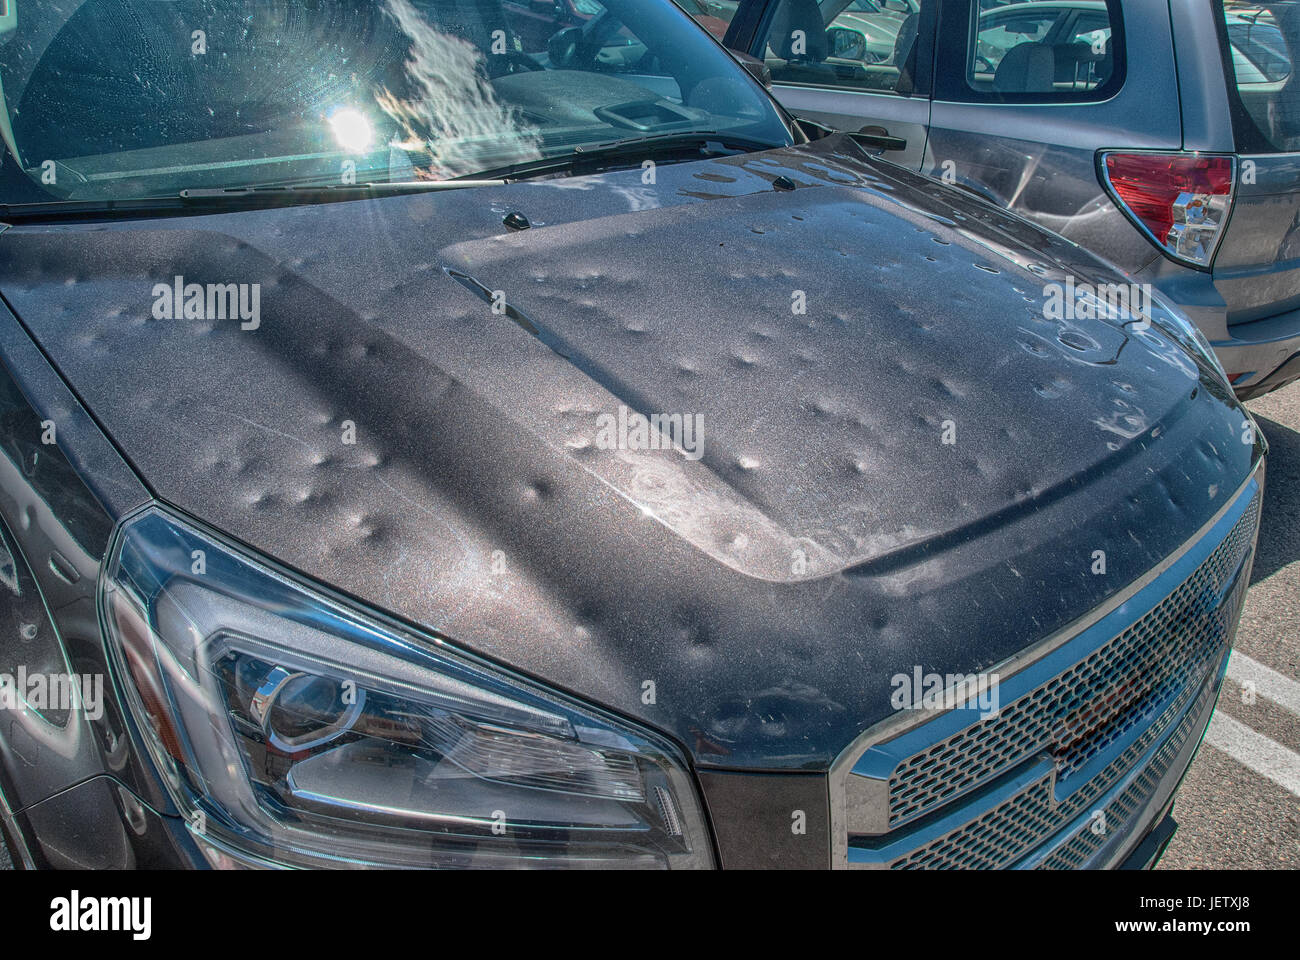 Dented car after a big hail storm Stock Photo